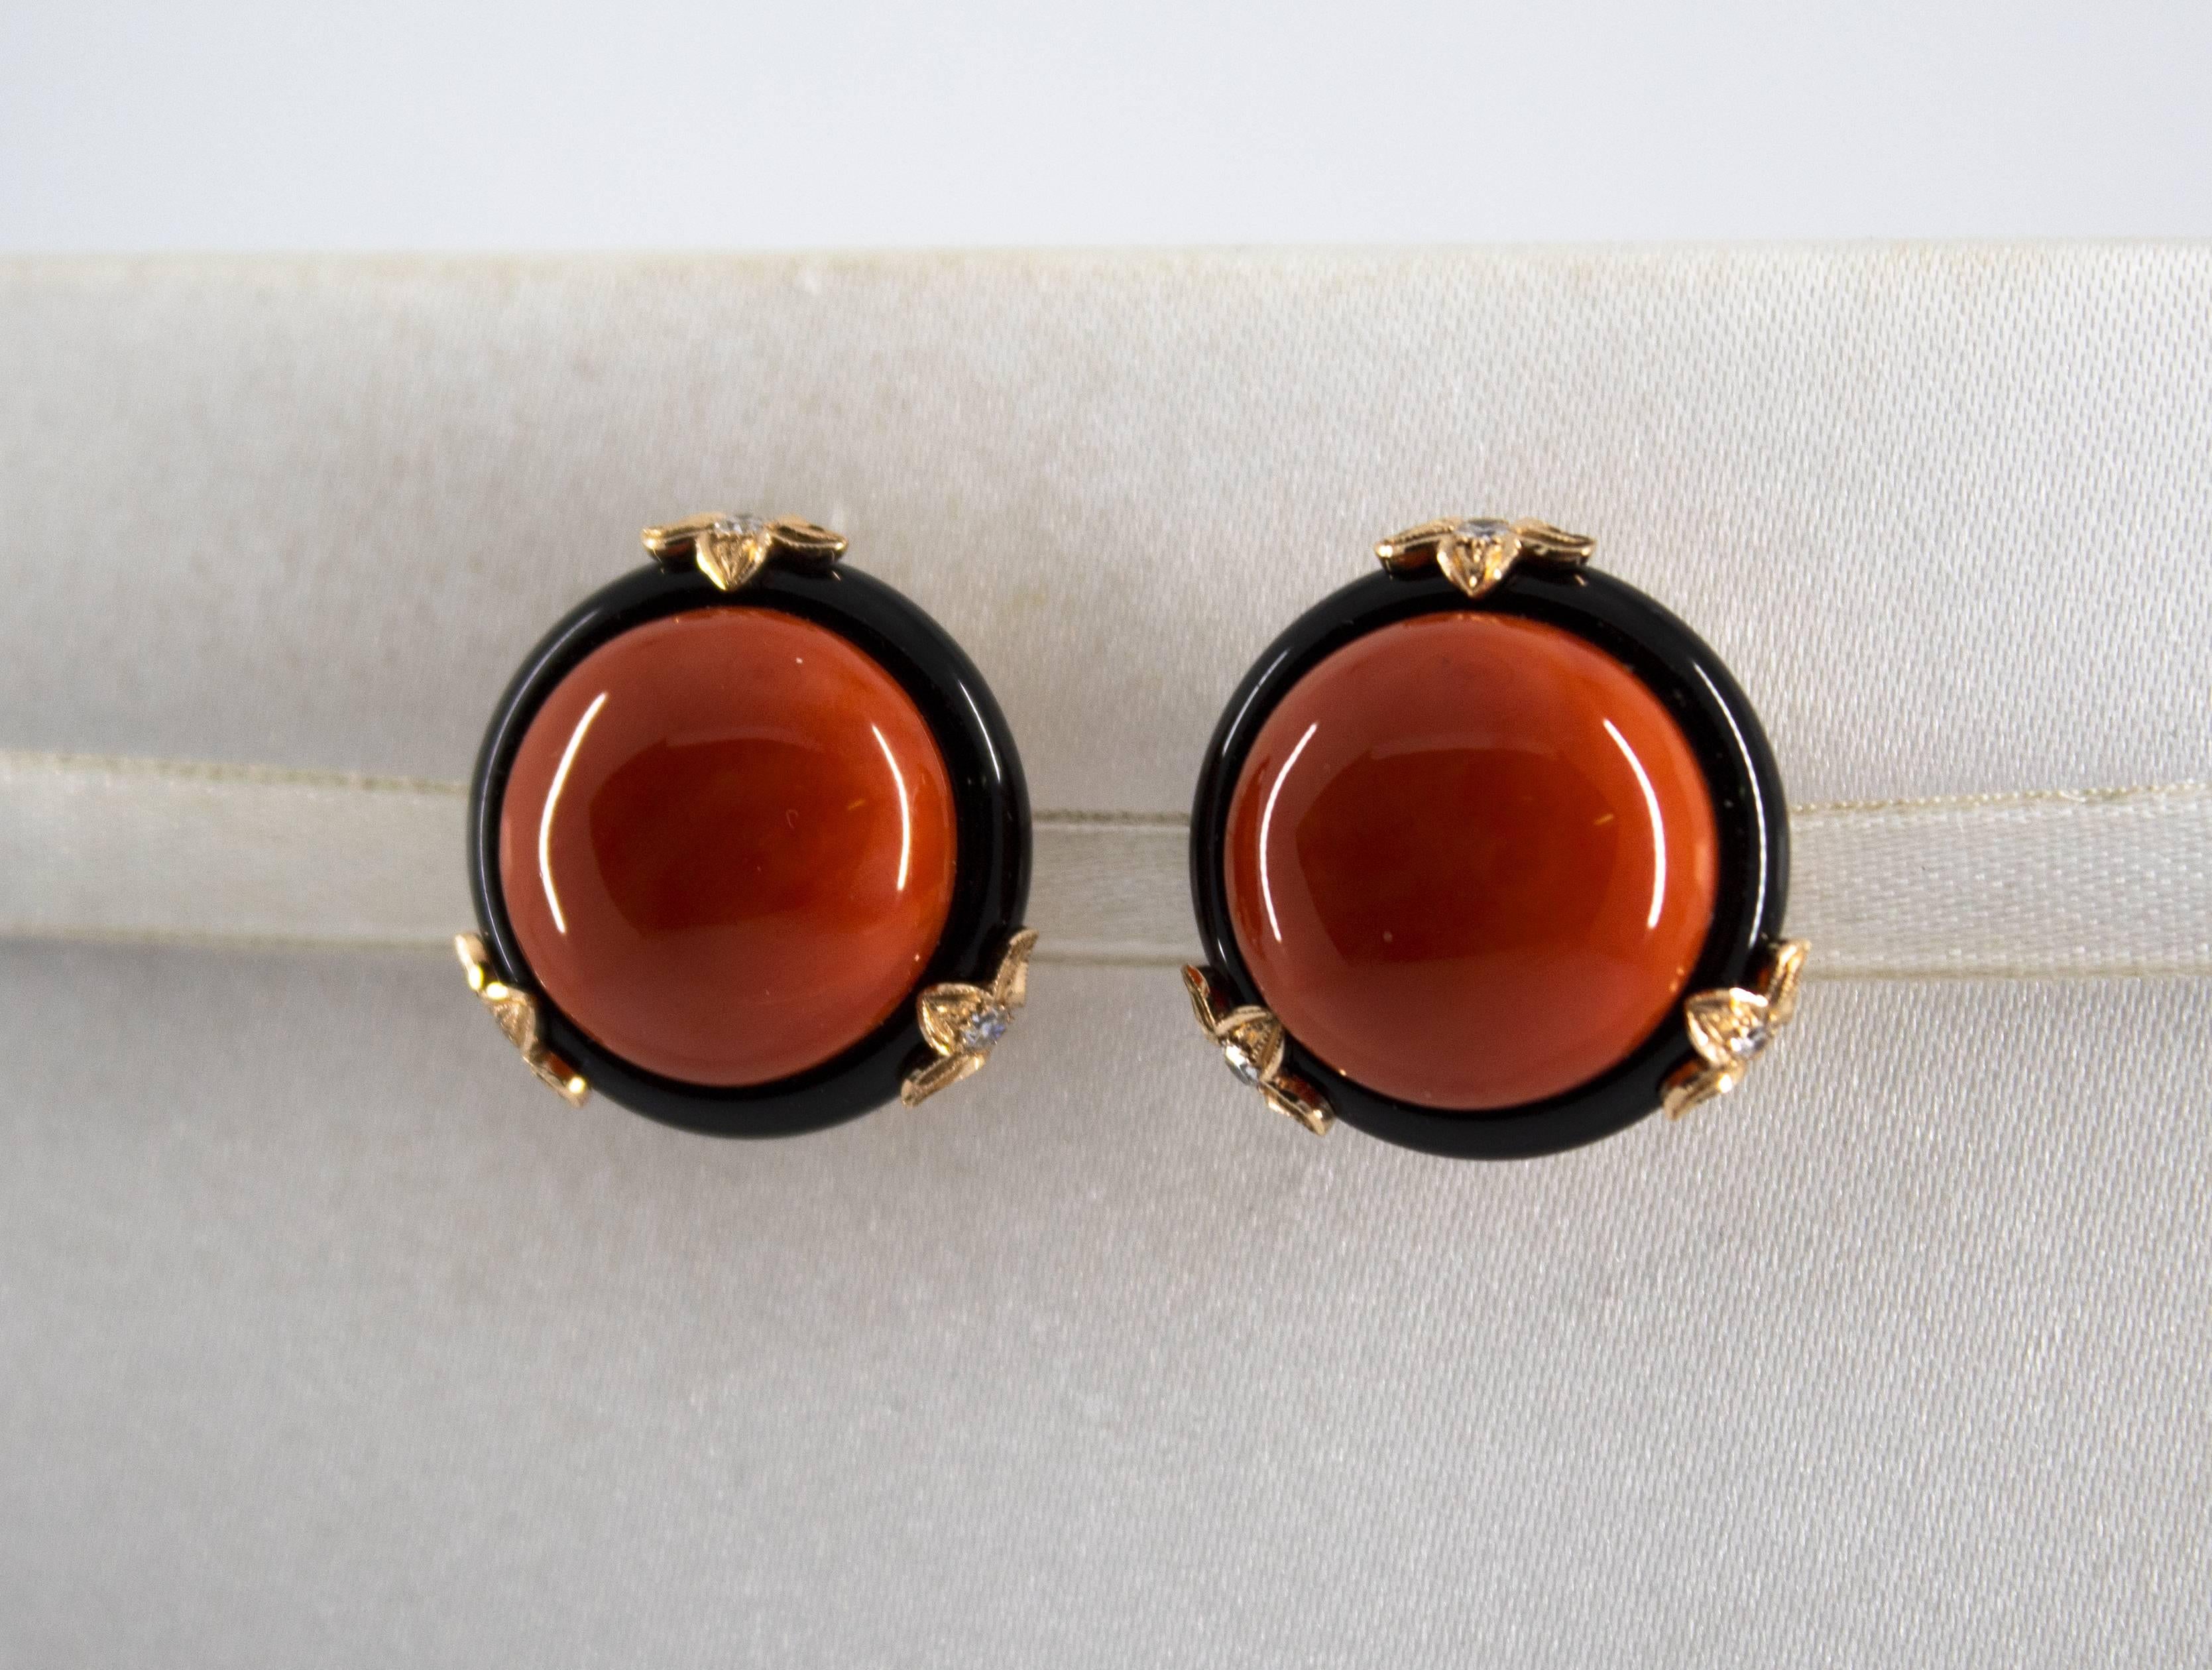 These Earrings are made of 14K Yellow Gold.
These Earrings have 0.24 Carats of White Diamonds.
These Earrings have Mediterranean (Sardinia, Italy) Red Coral and Onyx.
We're a workshop so every piece is handmade, customizable and resizable.